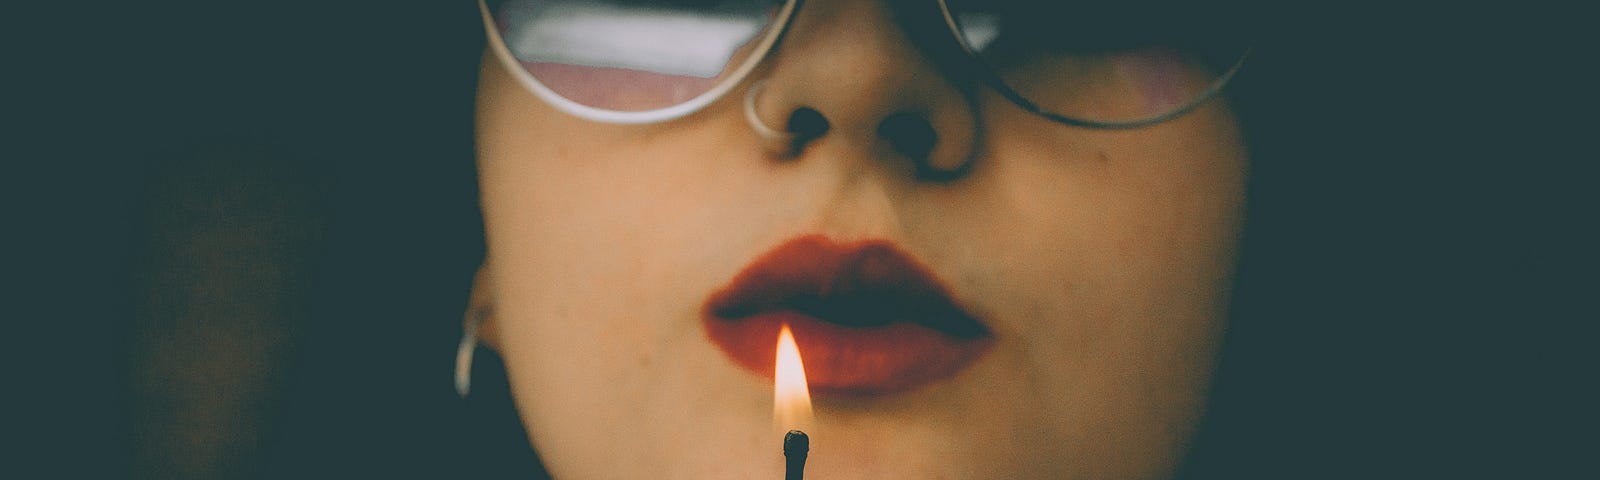 woman in glasses with red lipstick holding a lit match